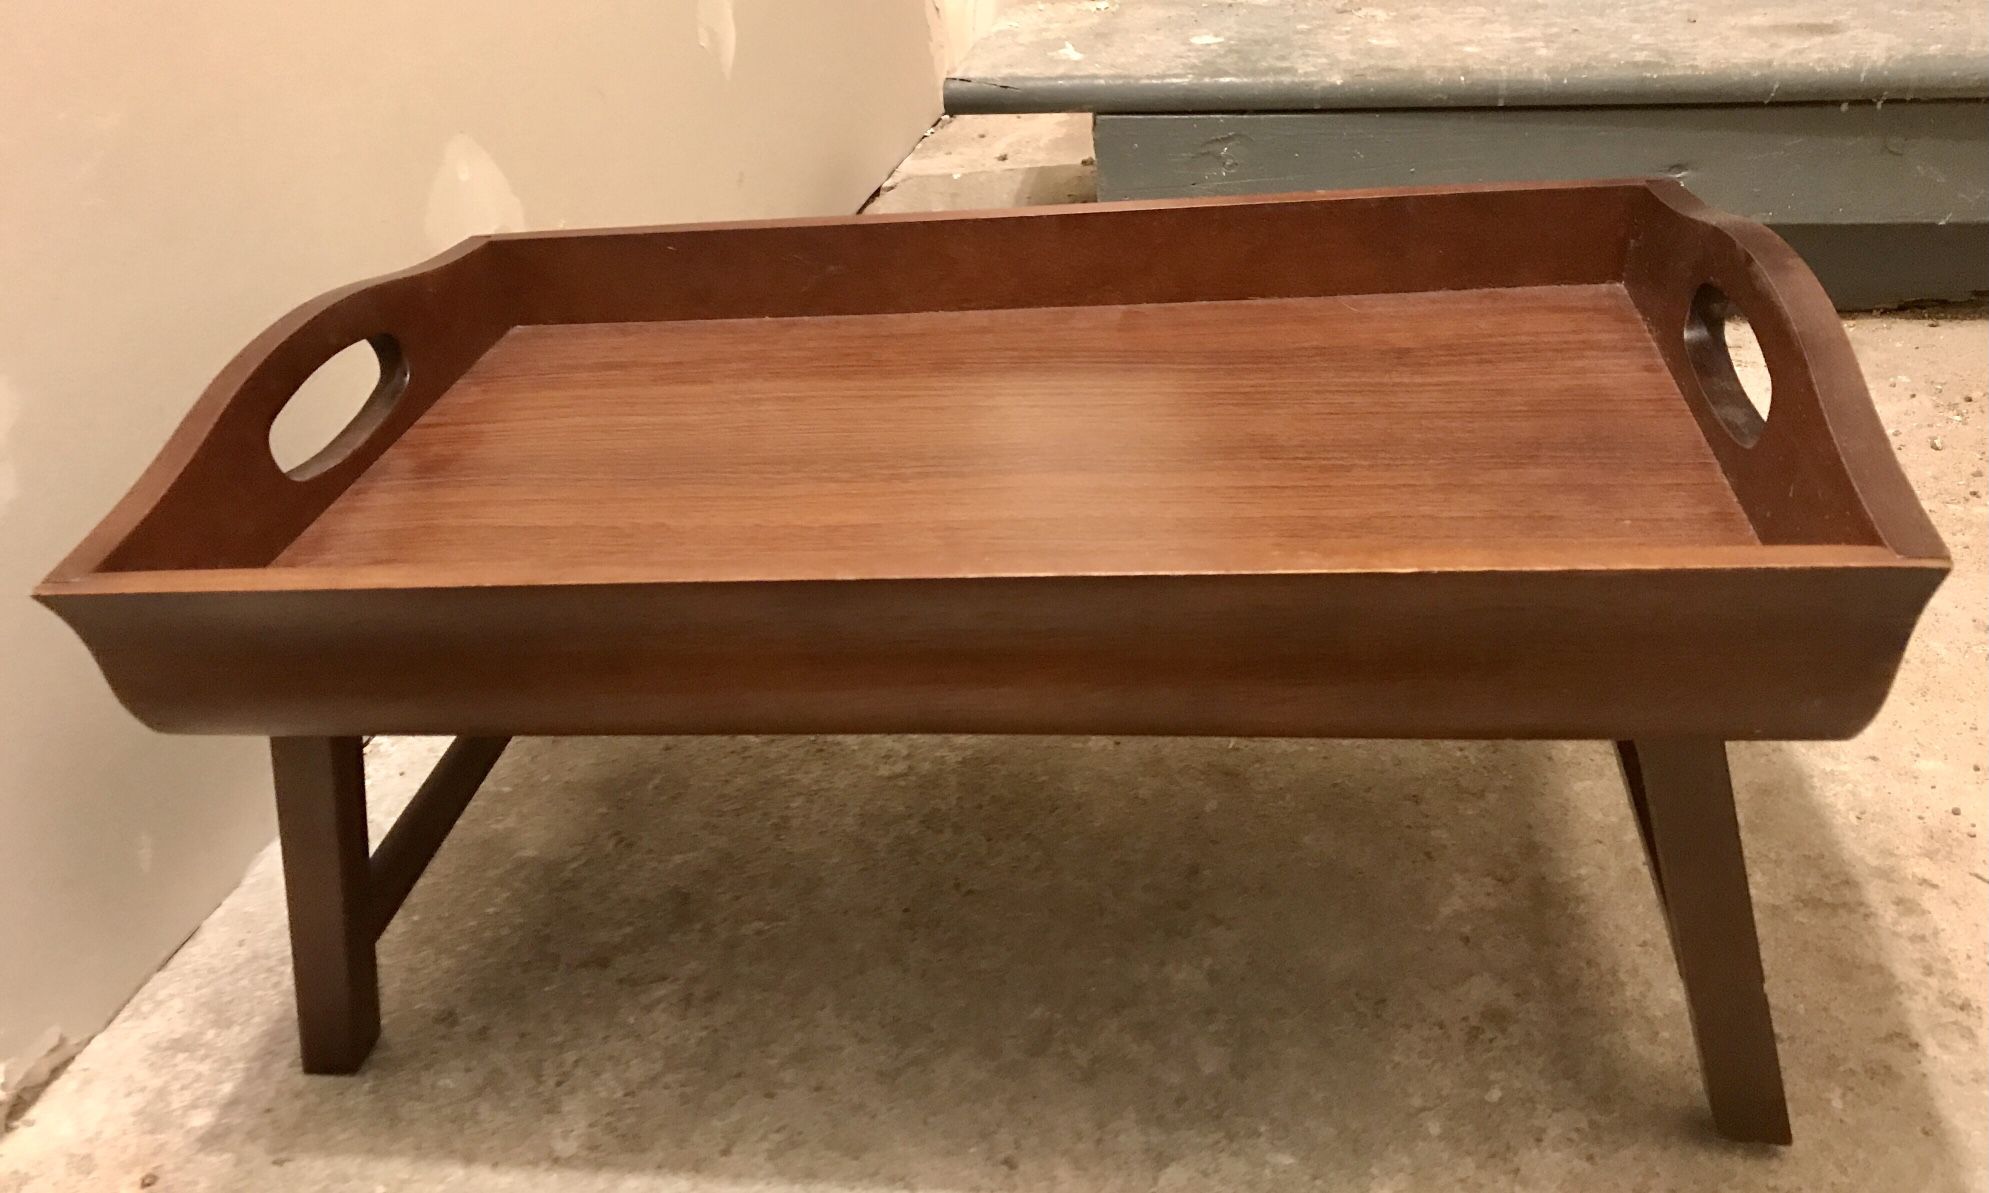 Breakfast/ Bed Tray Table with Handles Folding Legs 